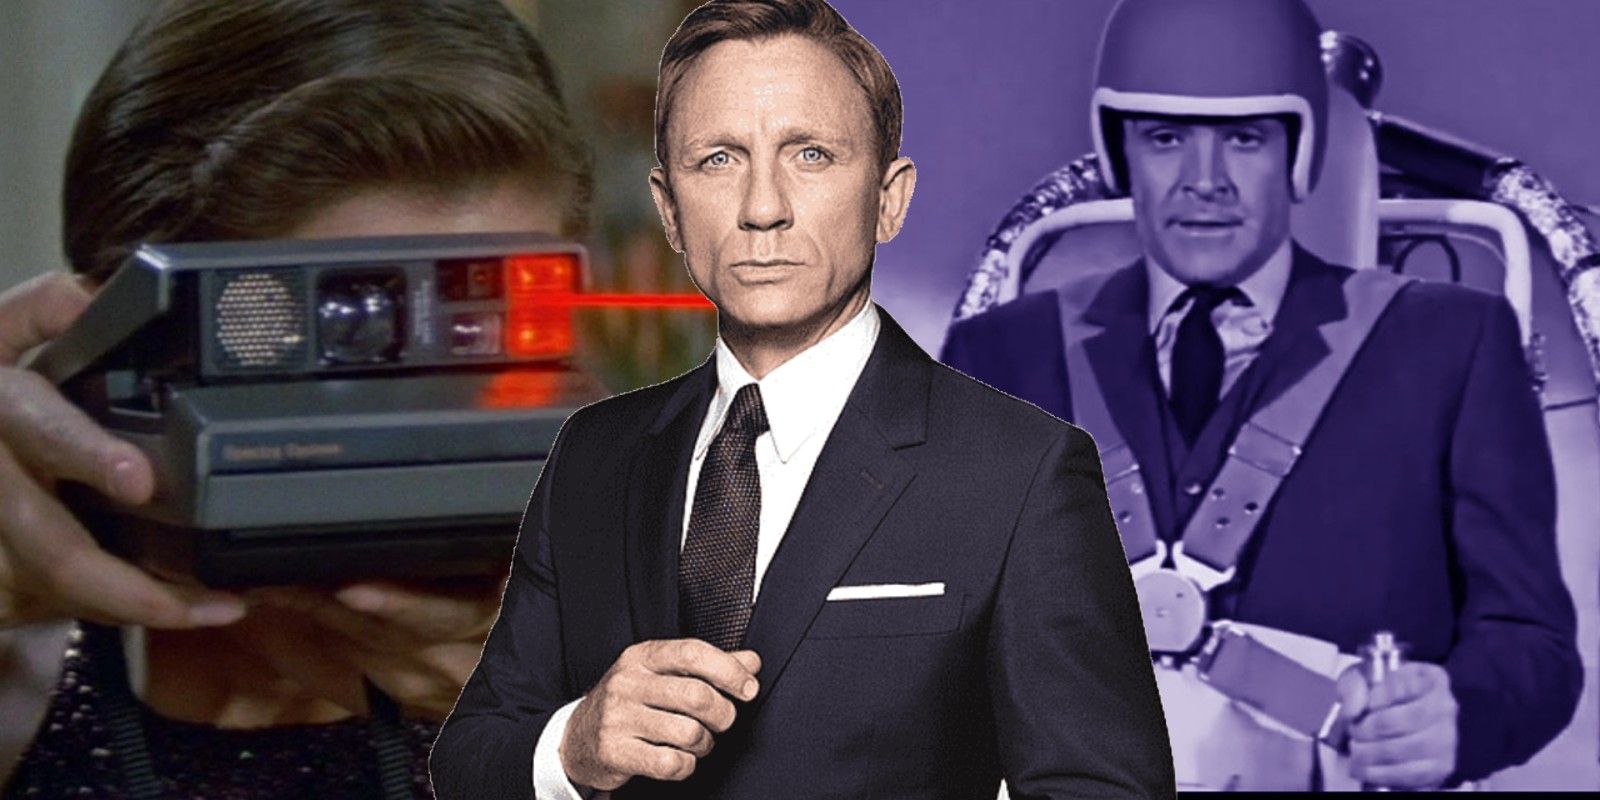 10 Bond Gadgets That Wouldn’t Have Worked In Daniel Craig’s Era